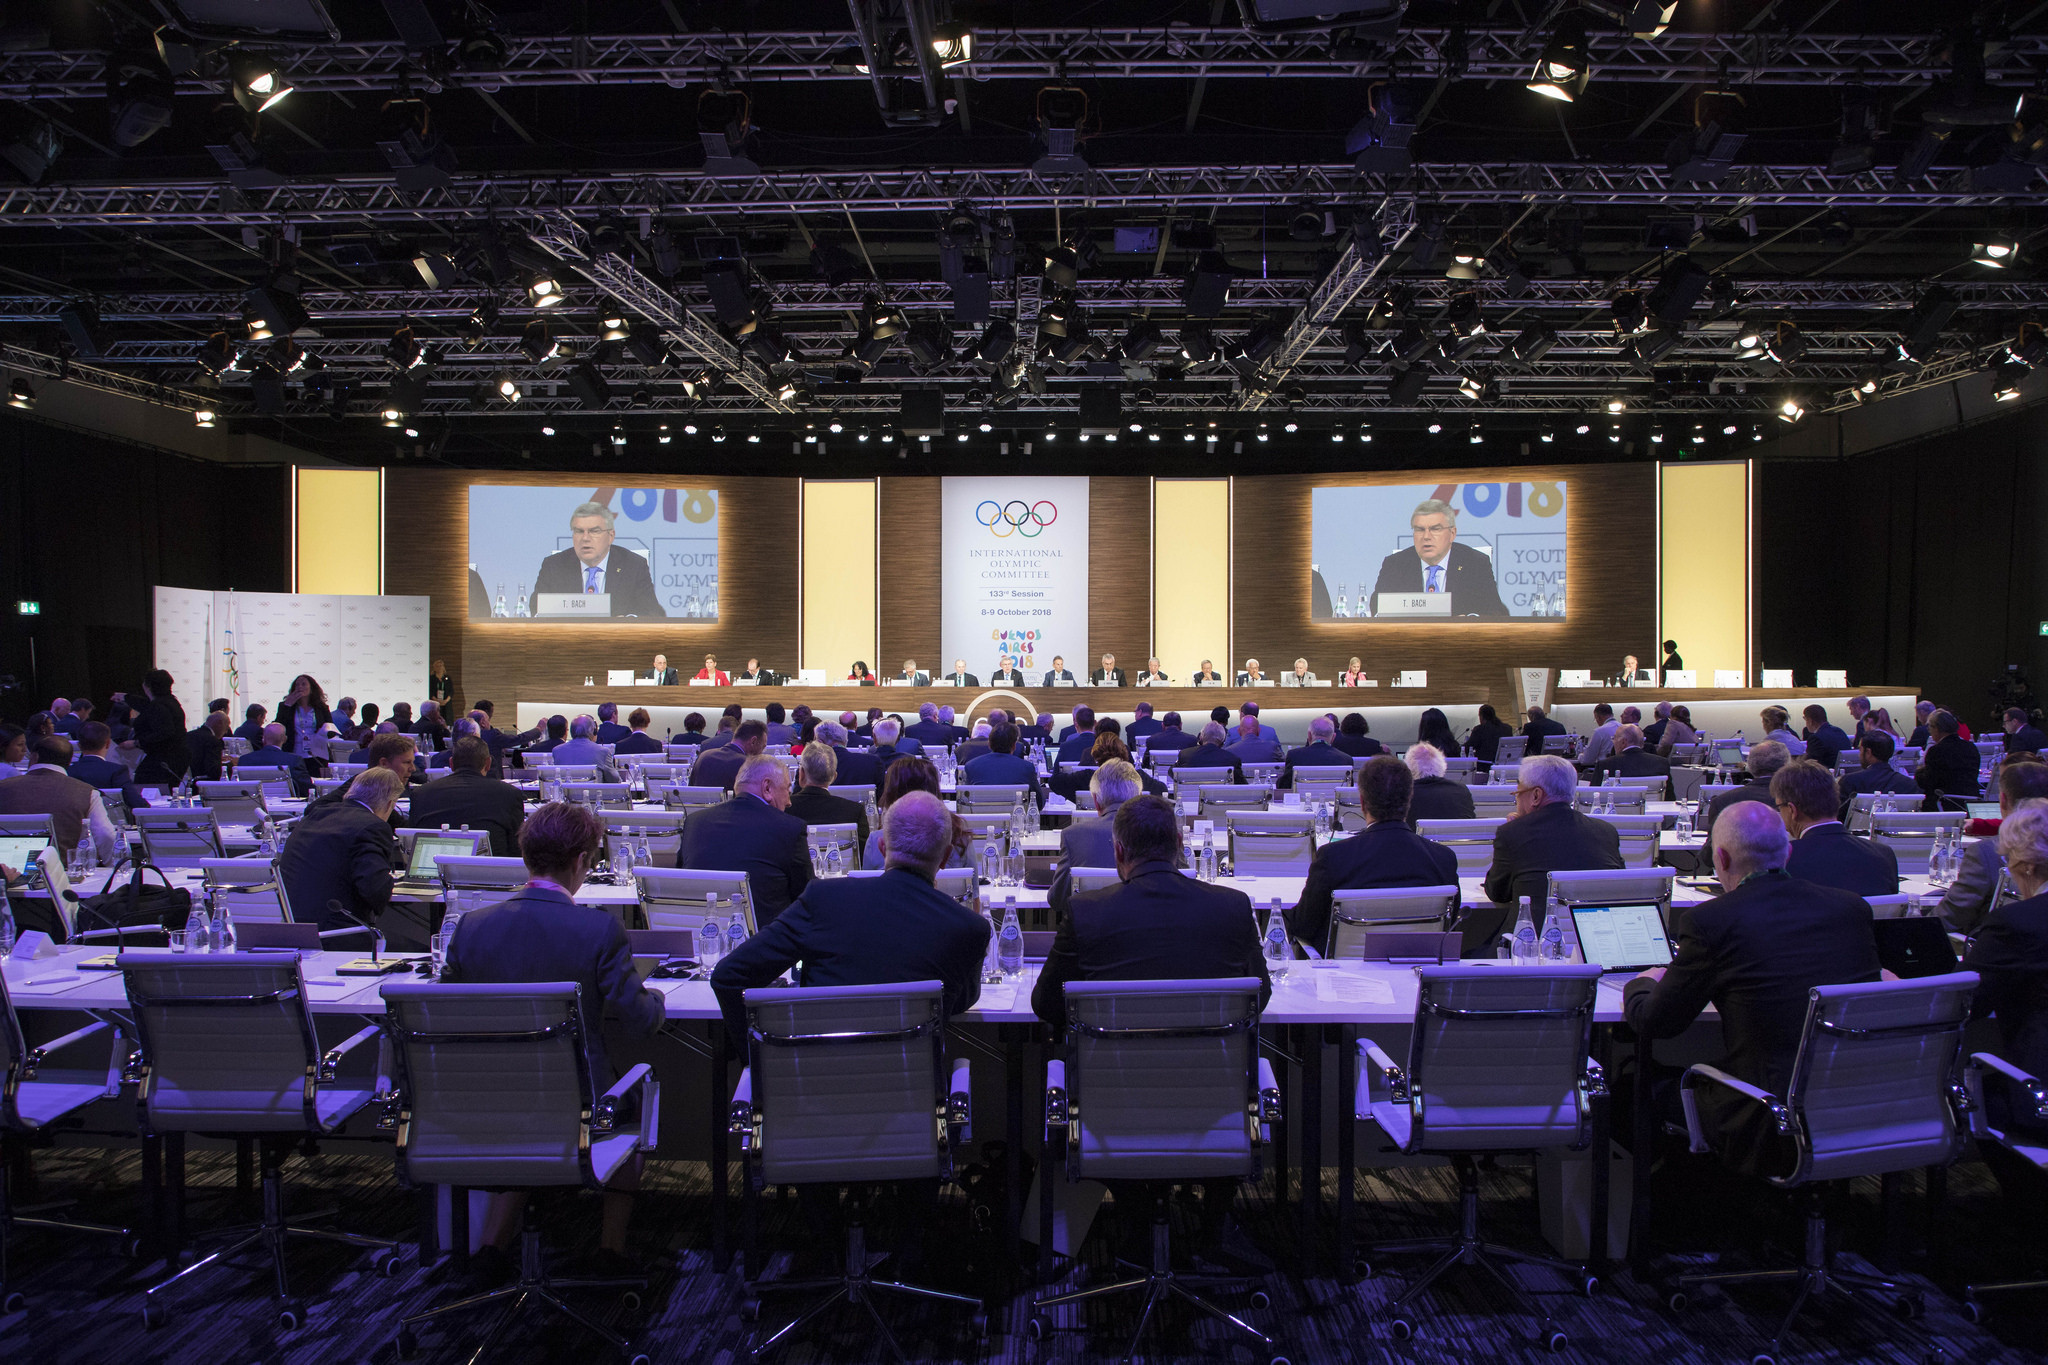 The declaration was formally adopted by the IOC at their Session in Buenos Aires earlier this month ©IOC